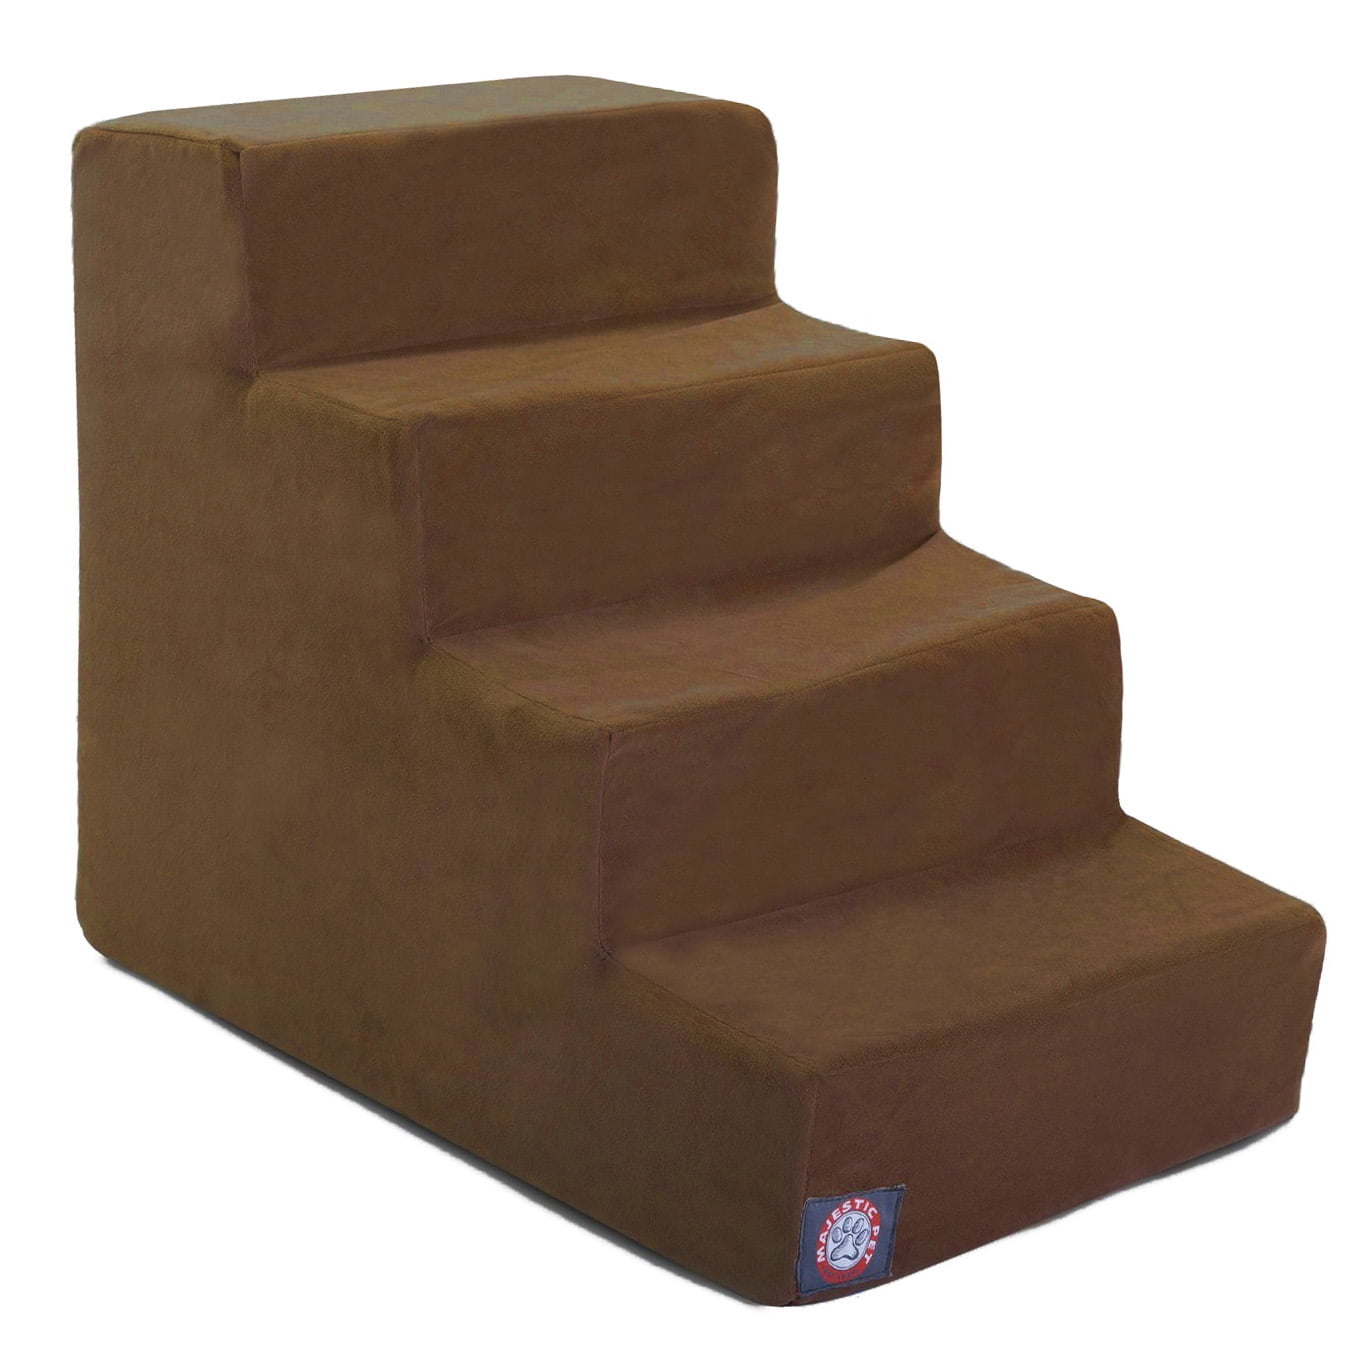 Pet Steps with Washable Cover Soft Foam Dog/Cat Strairs Non-Slip Bottom Puppy Ladders